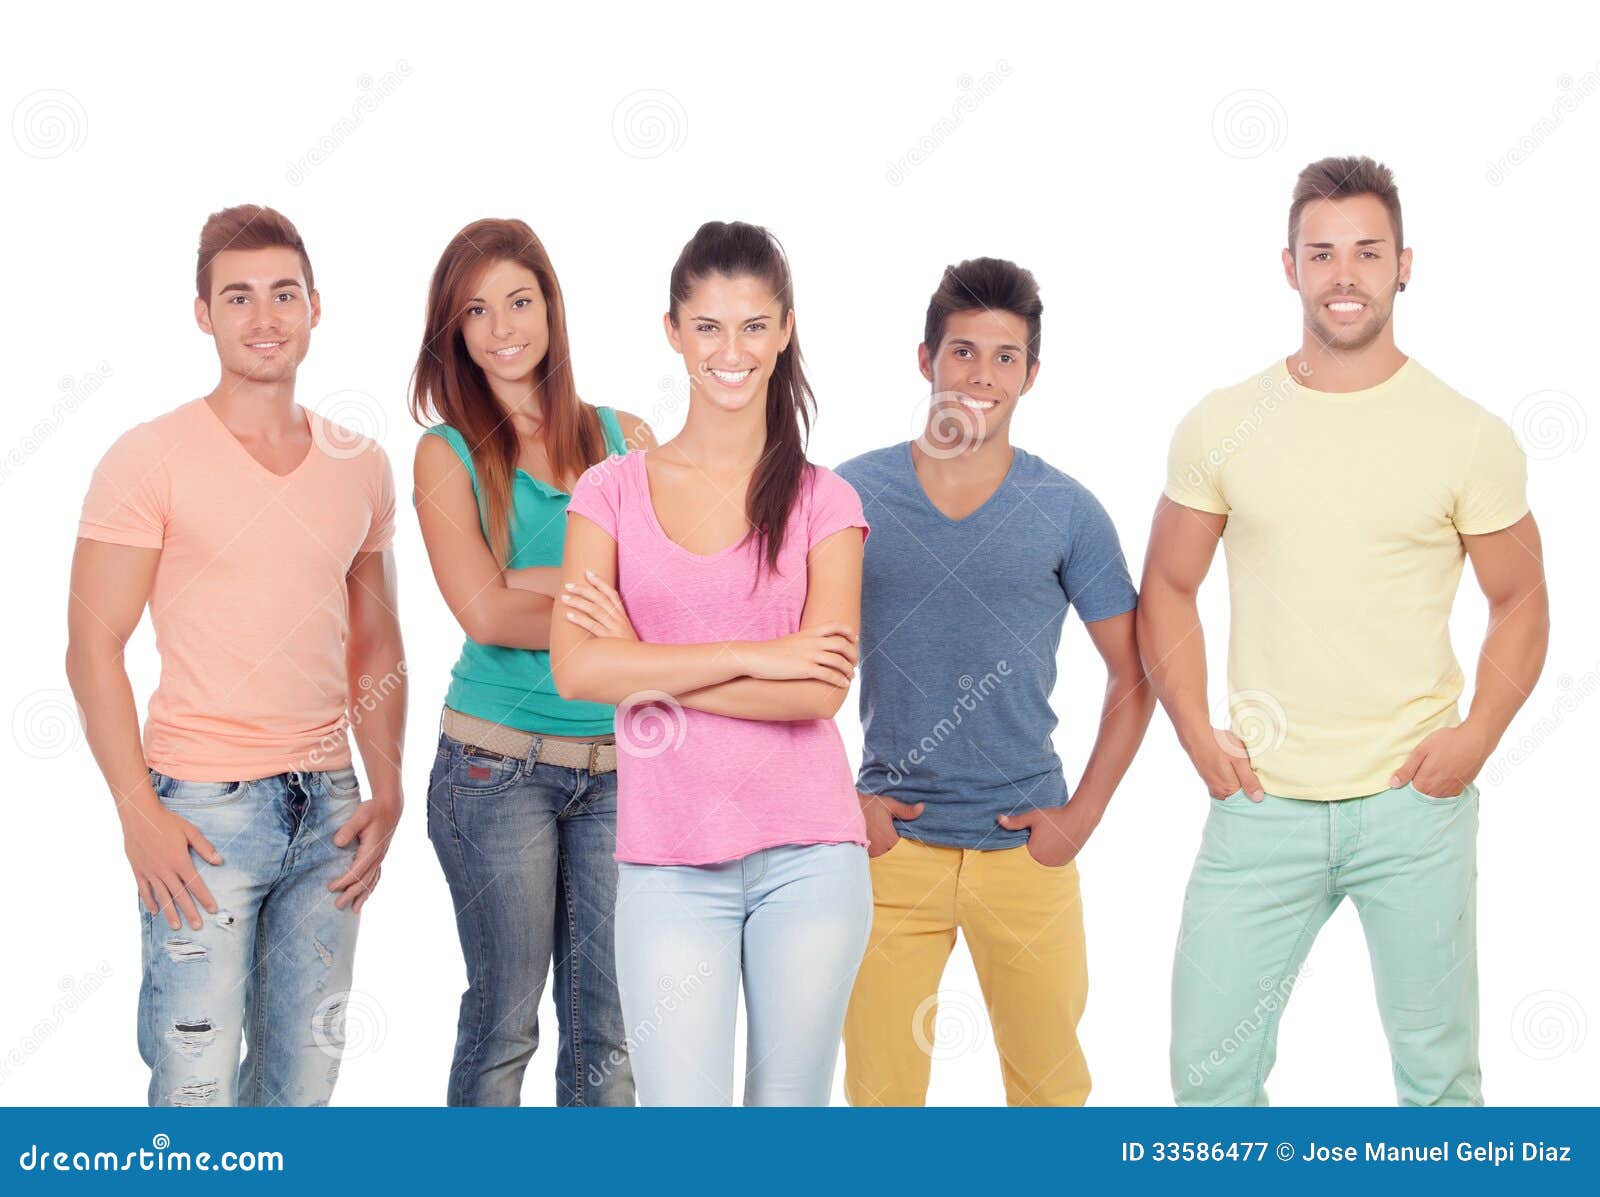 Casual Group Of Friends Royalty Free Stock Photography - Image: 33586477